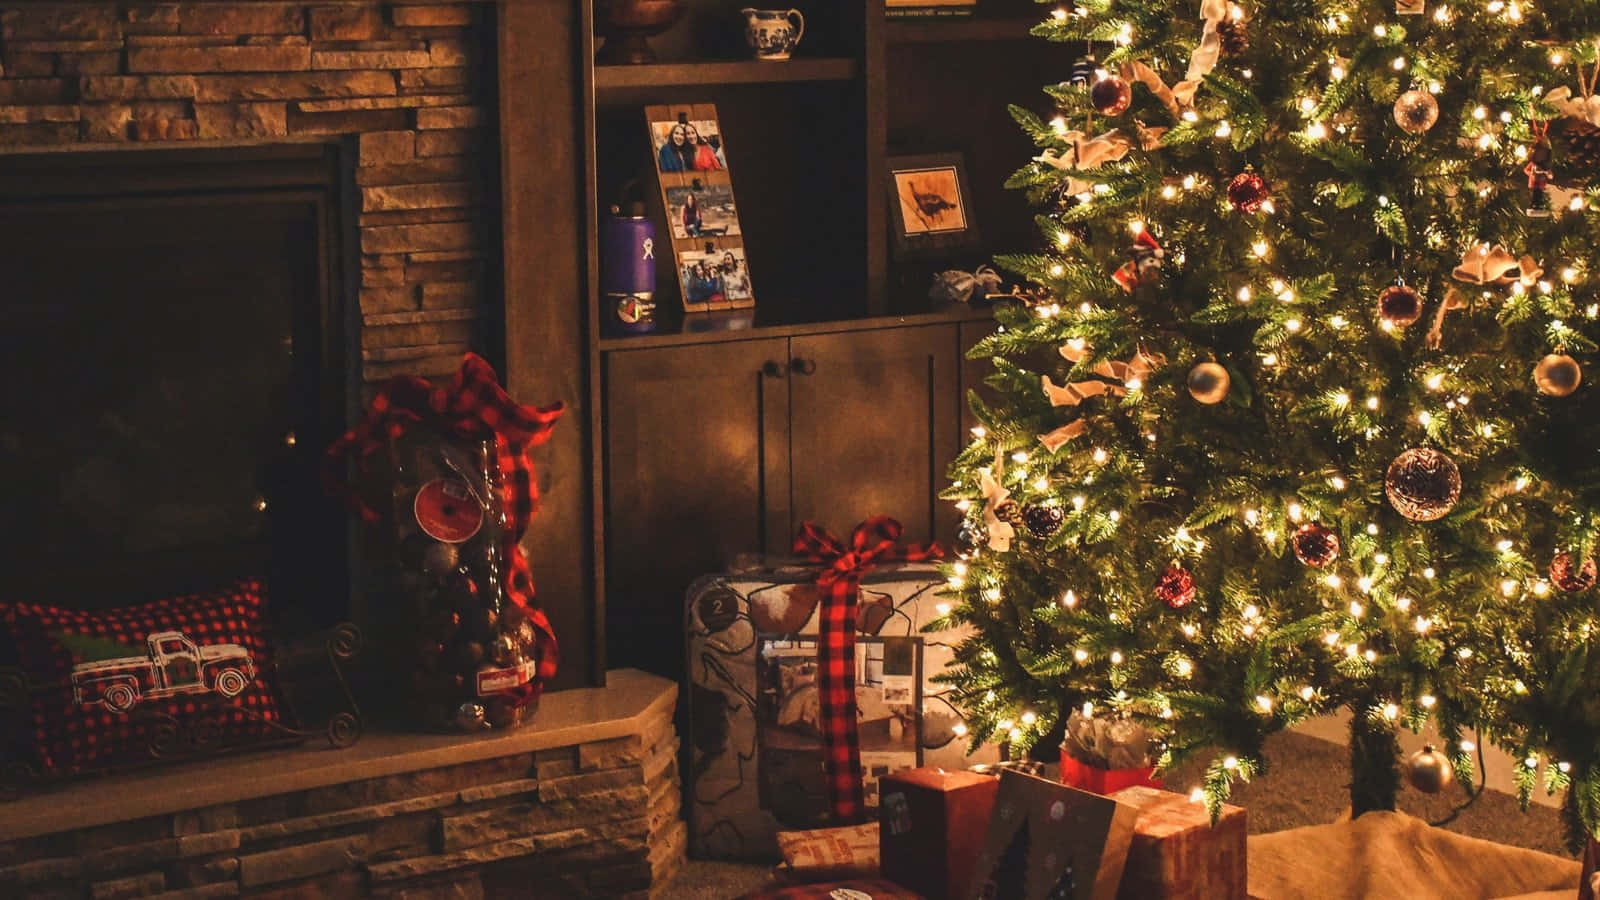 Evening Living Room With Festive Tree Christmas Teams Background